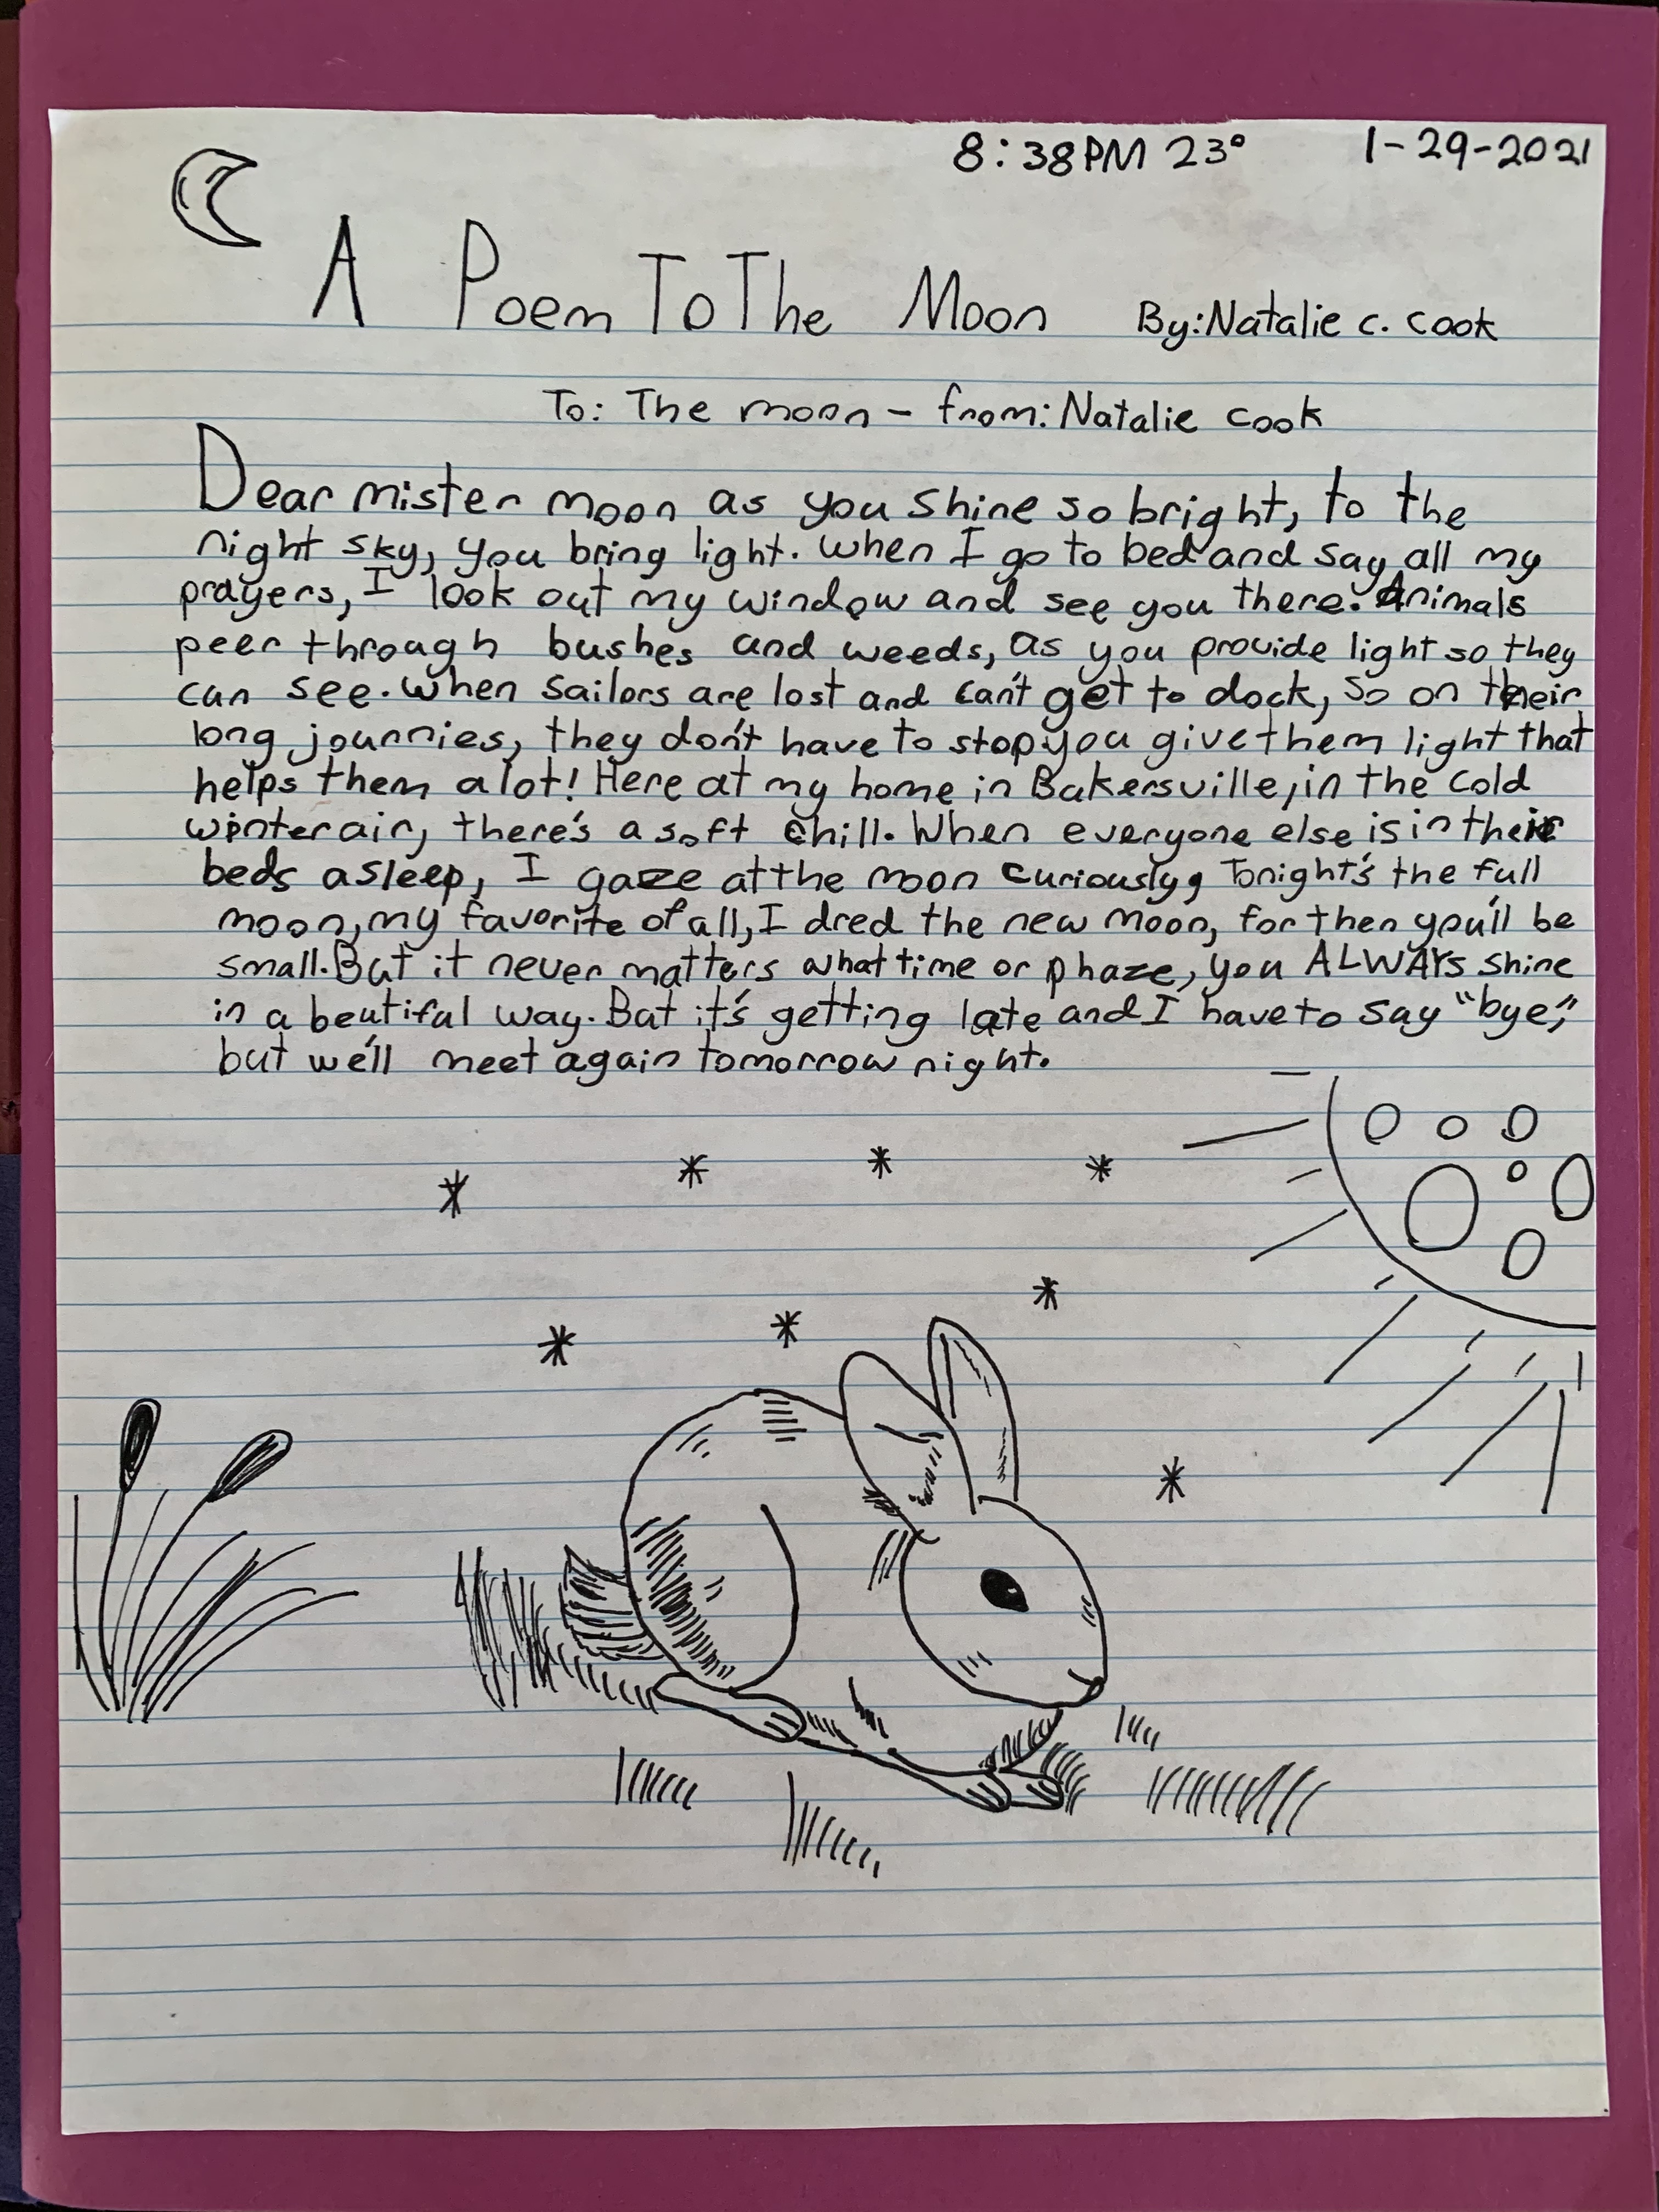 Natalie Cook’s journal entry from Jan. 28 was a poem she wrote about the moon. (Submitted)